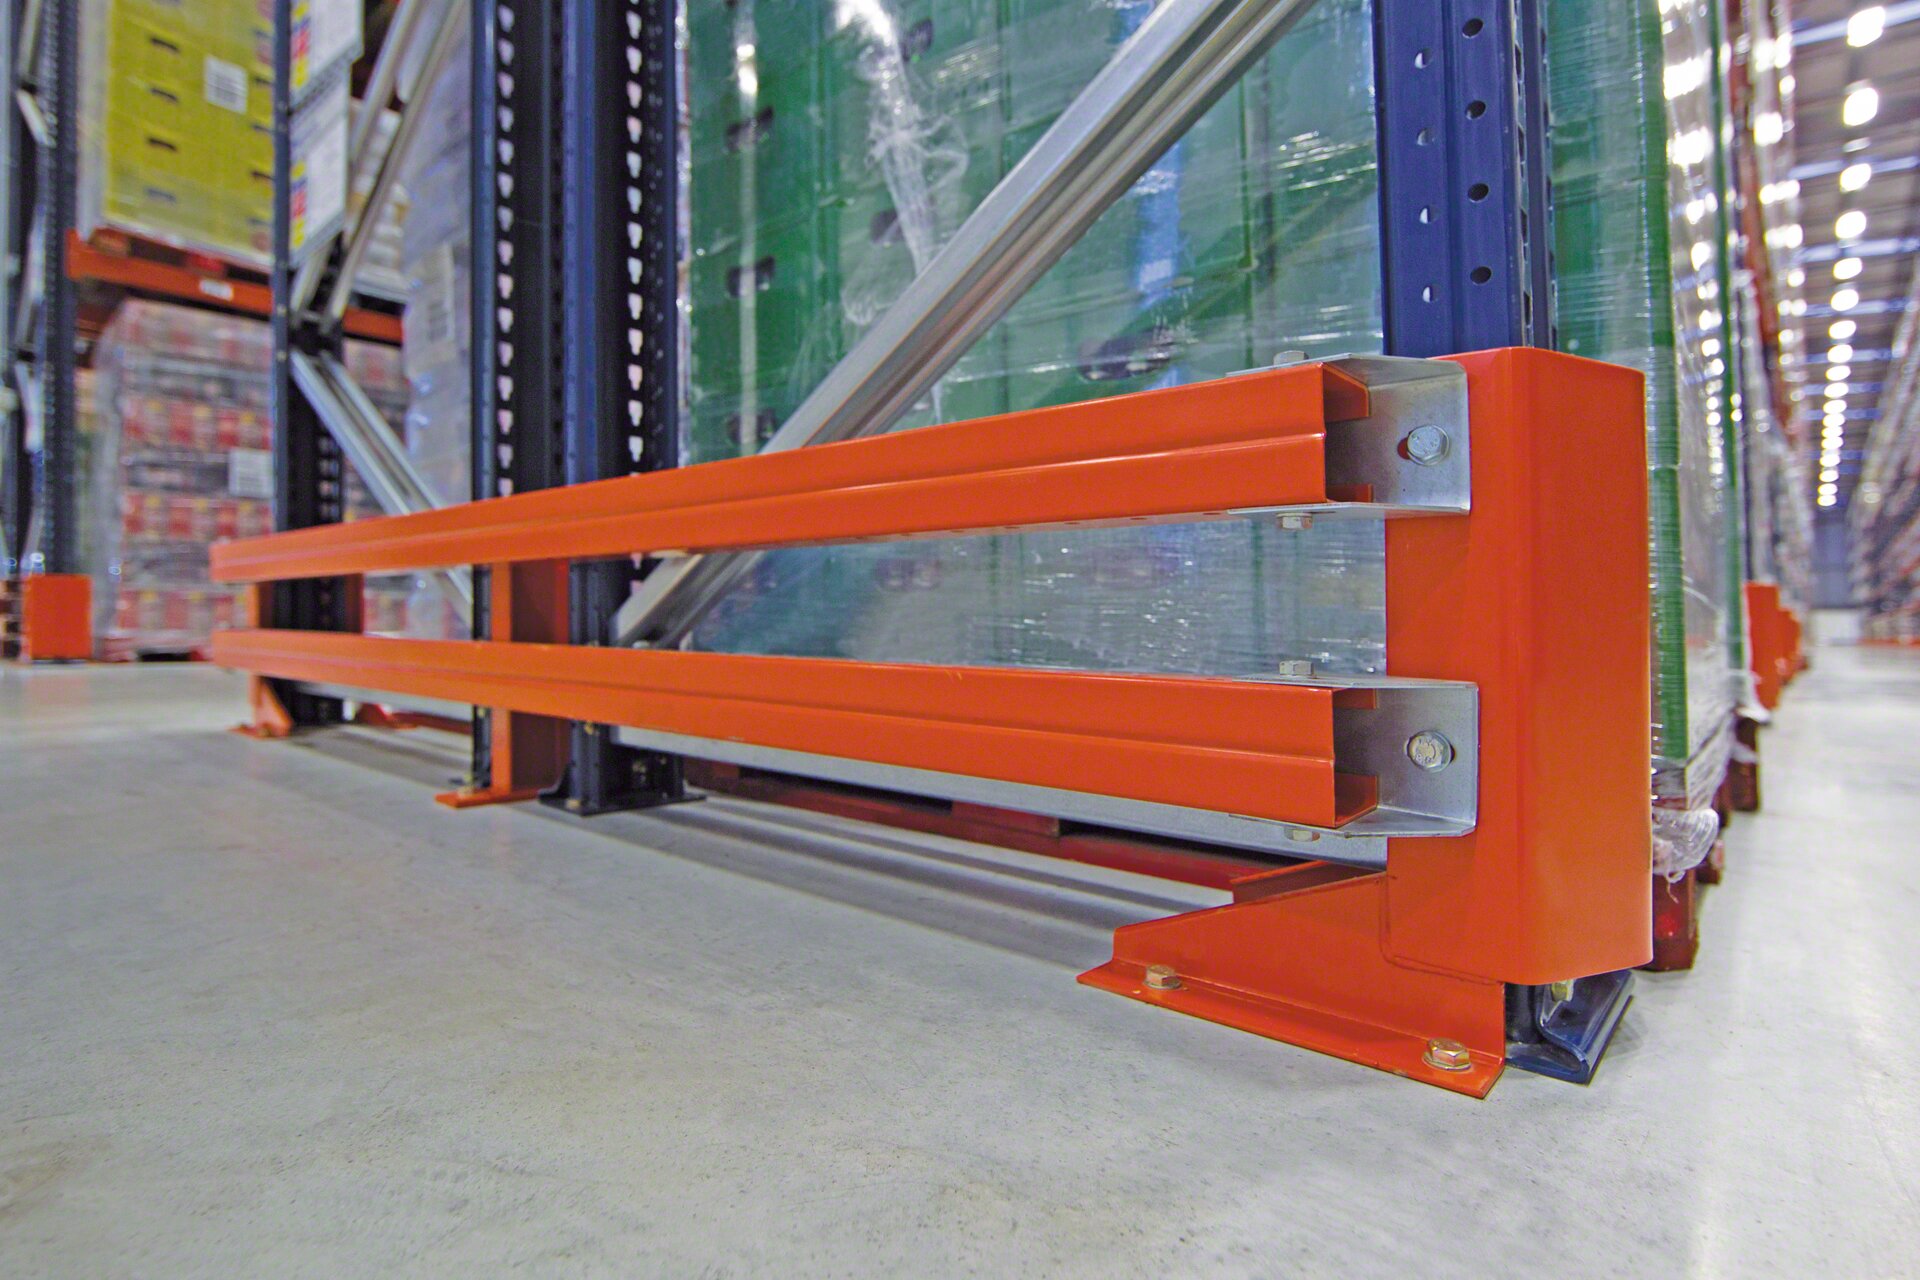 Install protectors that avoid blows from the handling equipment against the racks